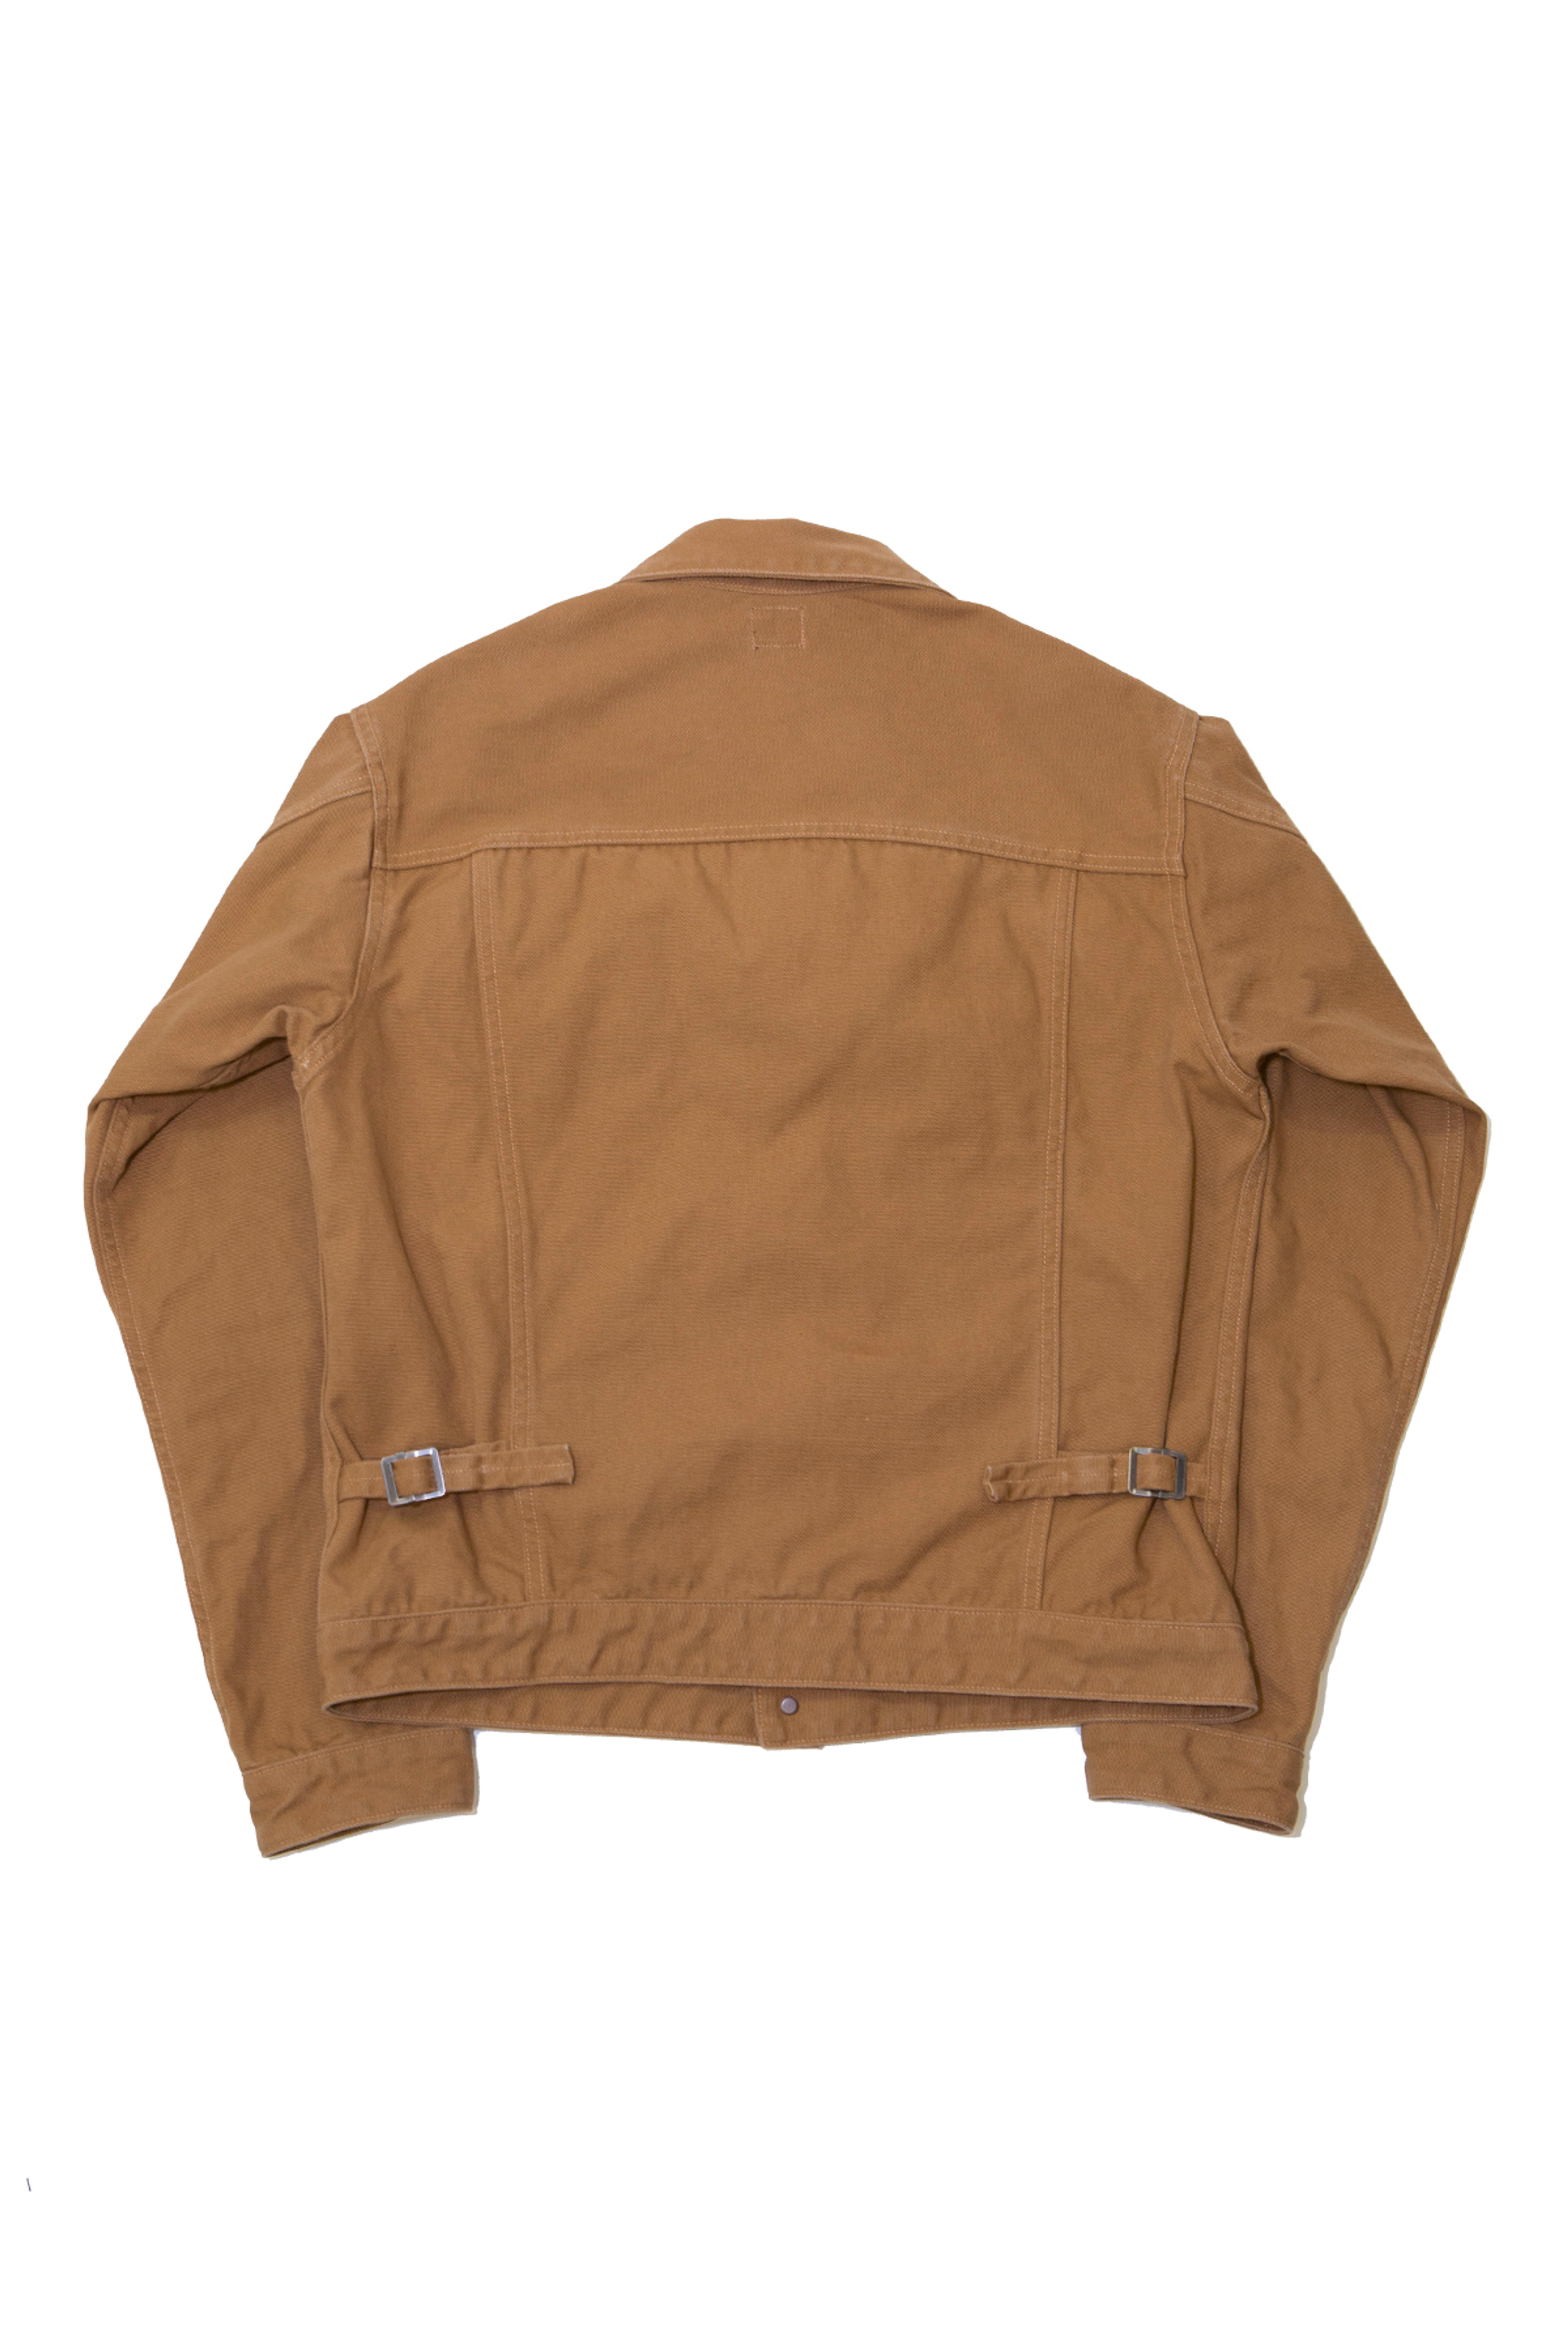 Starborn - Tan Canvas — Runabout Goods